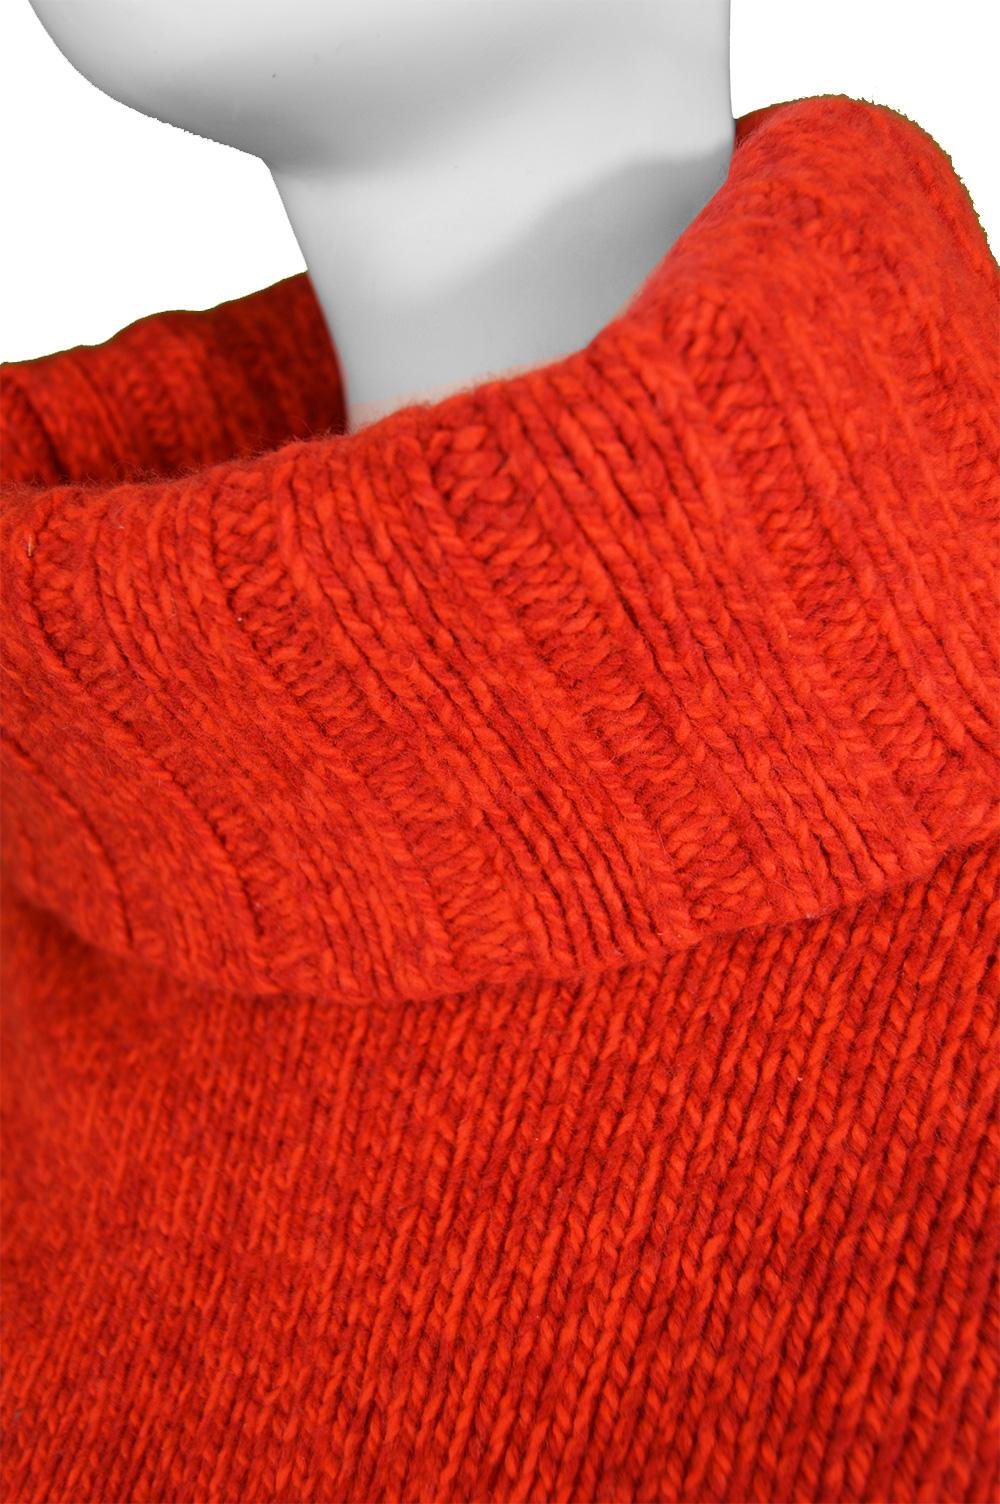 Mila Schon Vintage Red Wool & Cashmere Balloon Sleeve Roll Neck Sweater, 1980s im Zustand „Gut“ in Doncaster, South Yorkshire